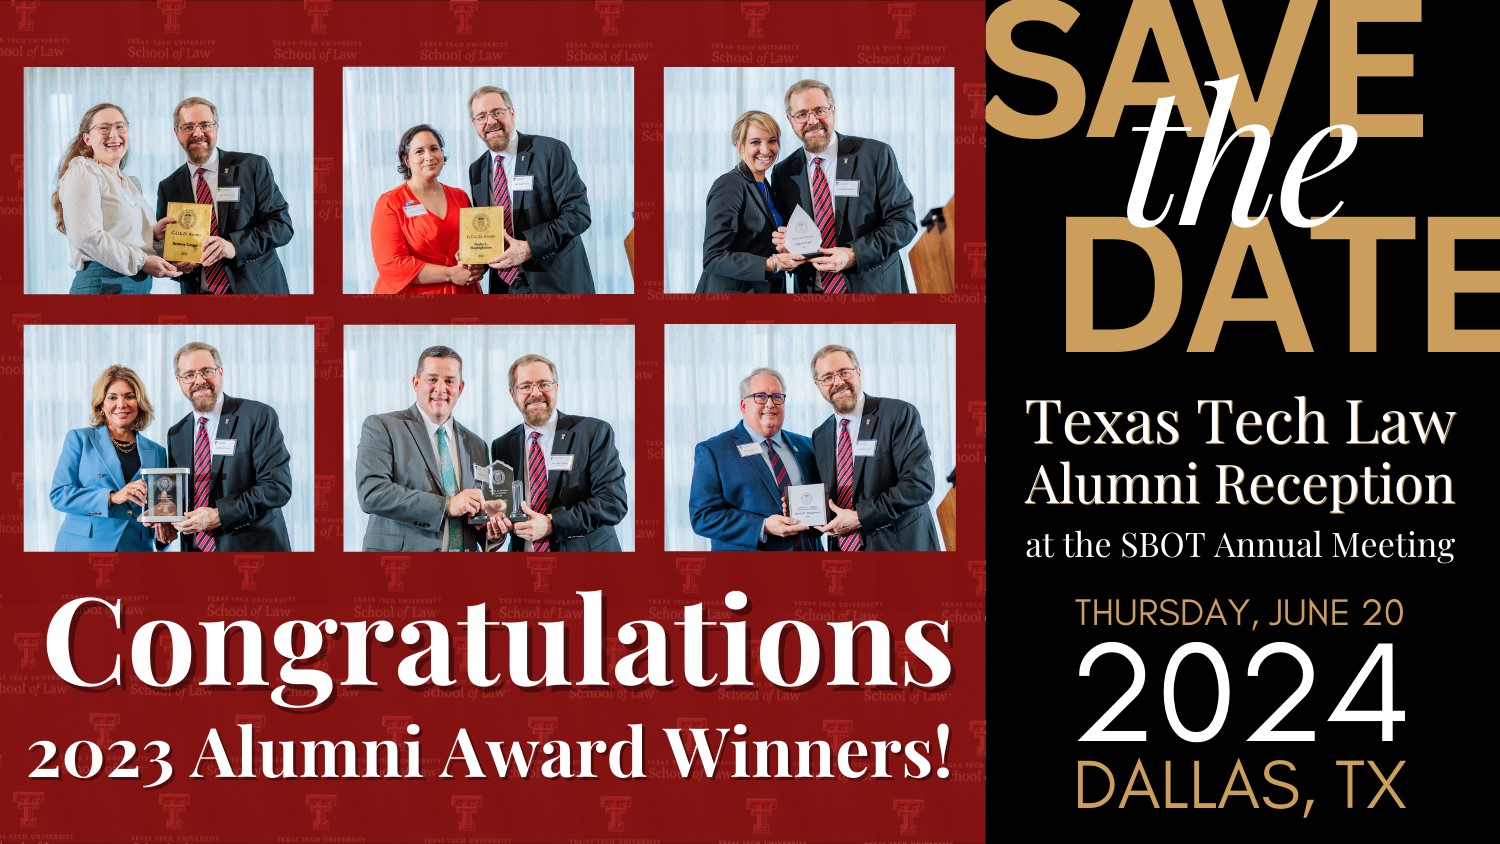 Don’t forget to save the date! The Alumni Association Awards will be presented on Thursday, June 22, 2024, during the Alumni Reception held in conjunction with the State of Bar Texas Annual Meeting.